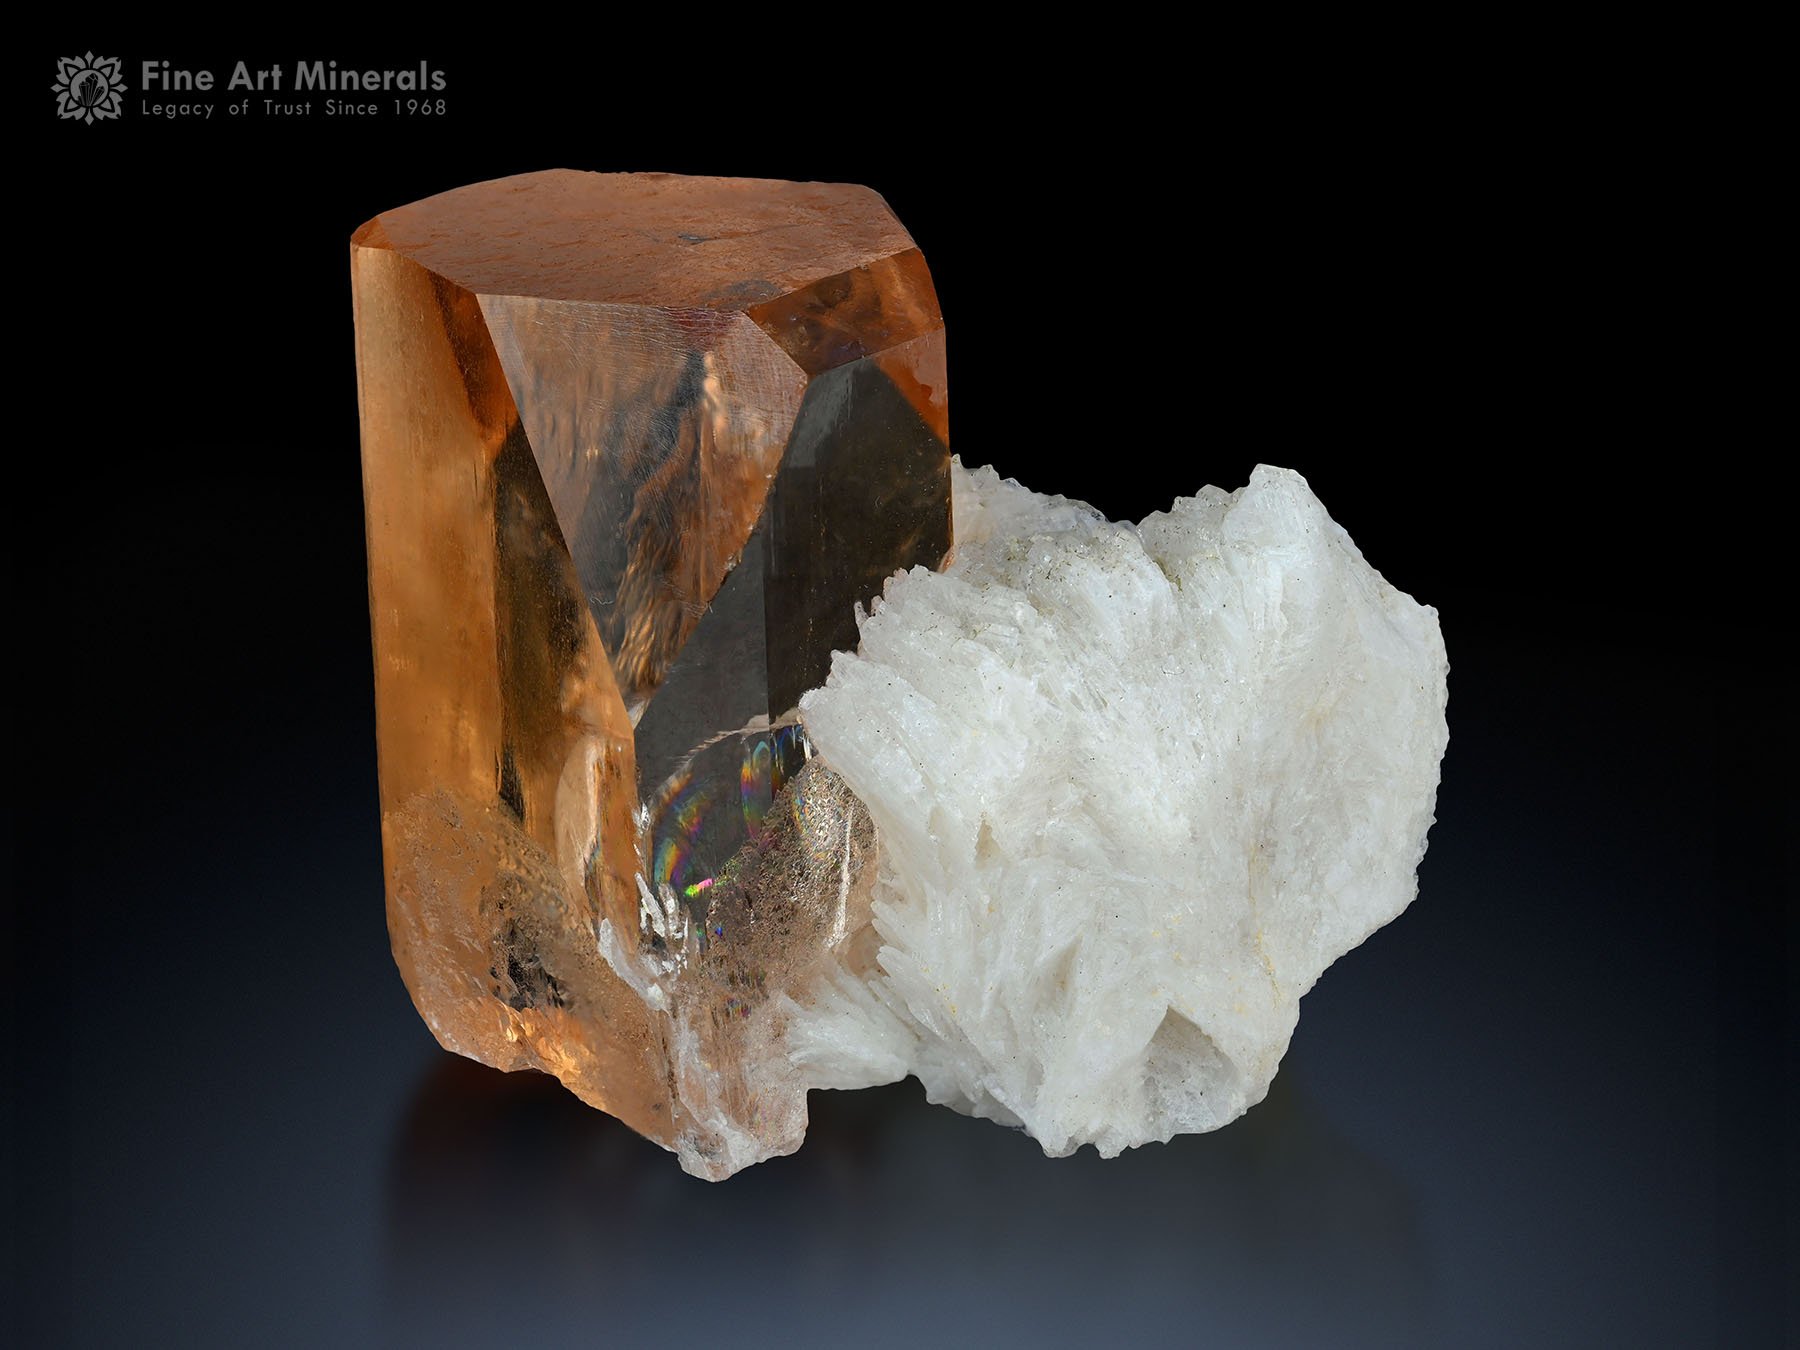 Topaz with Cleavelandite from Shigar Pakistan